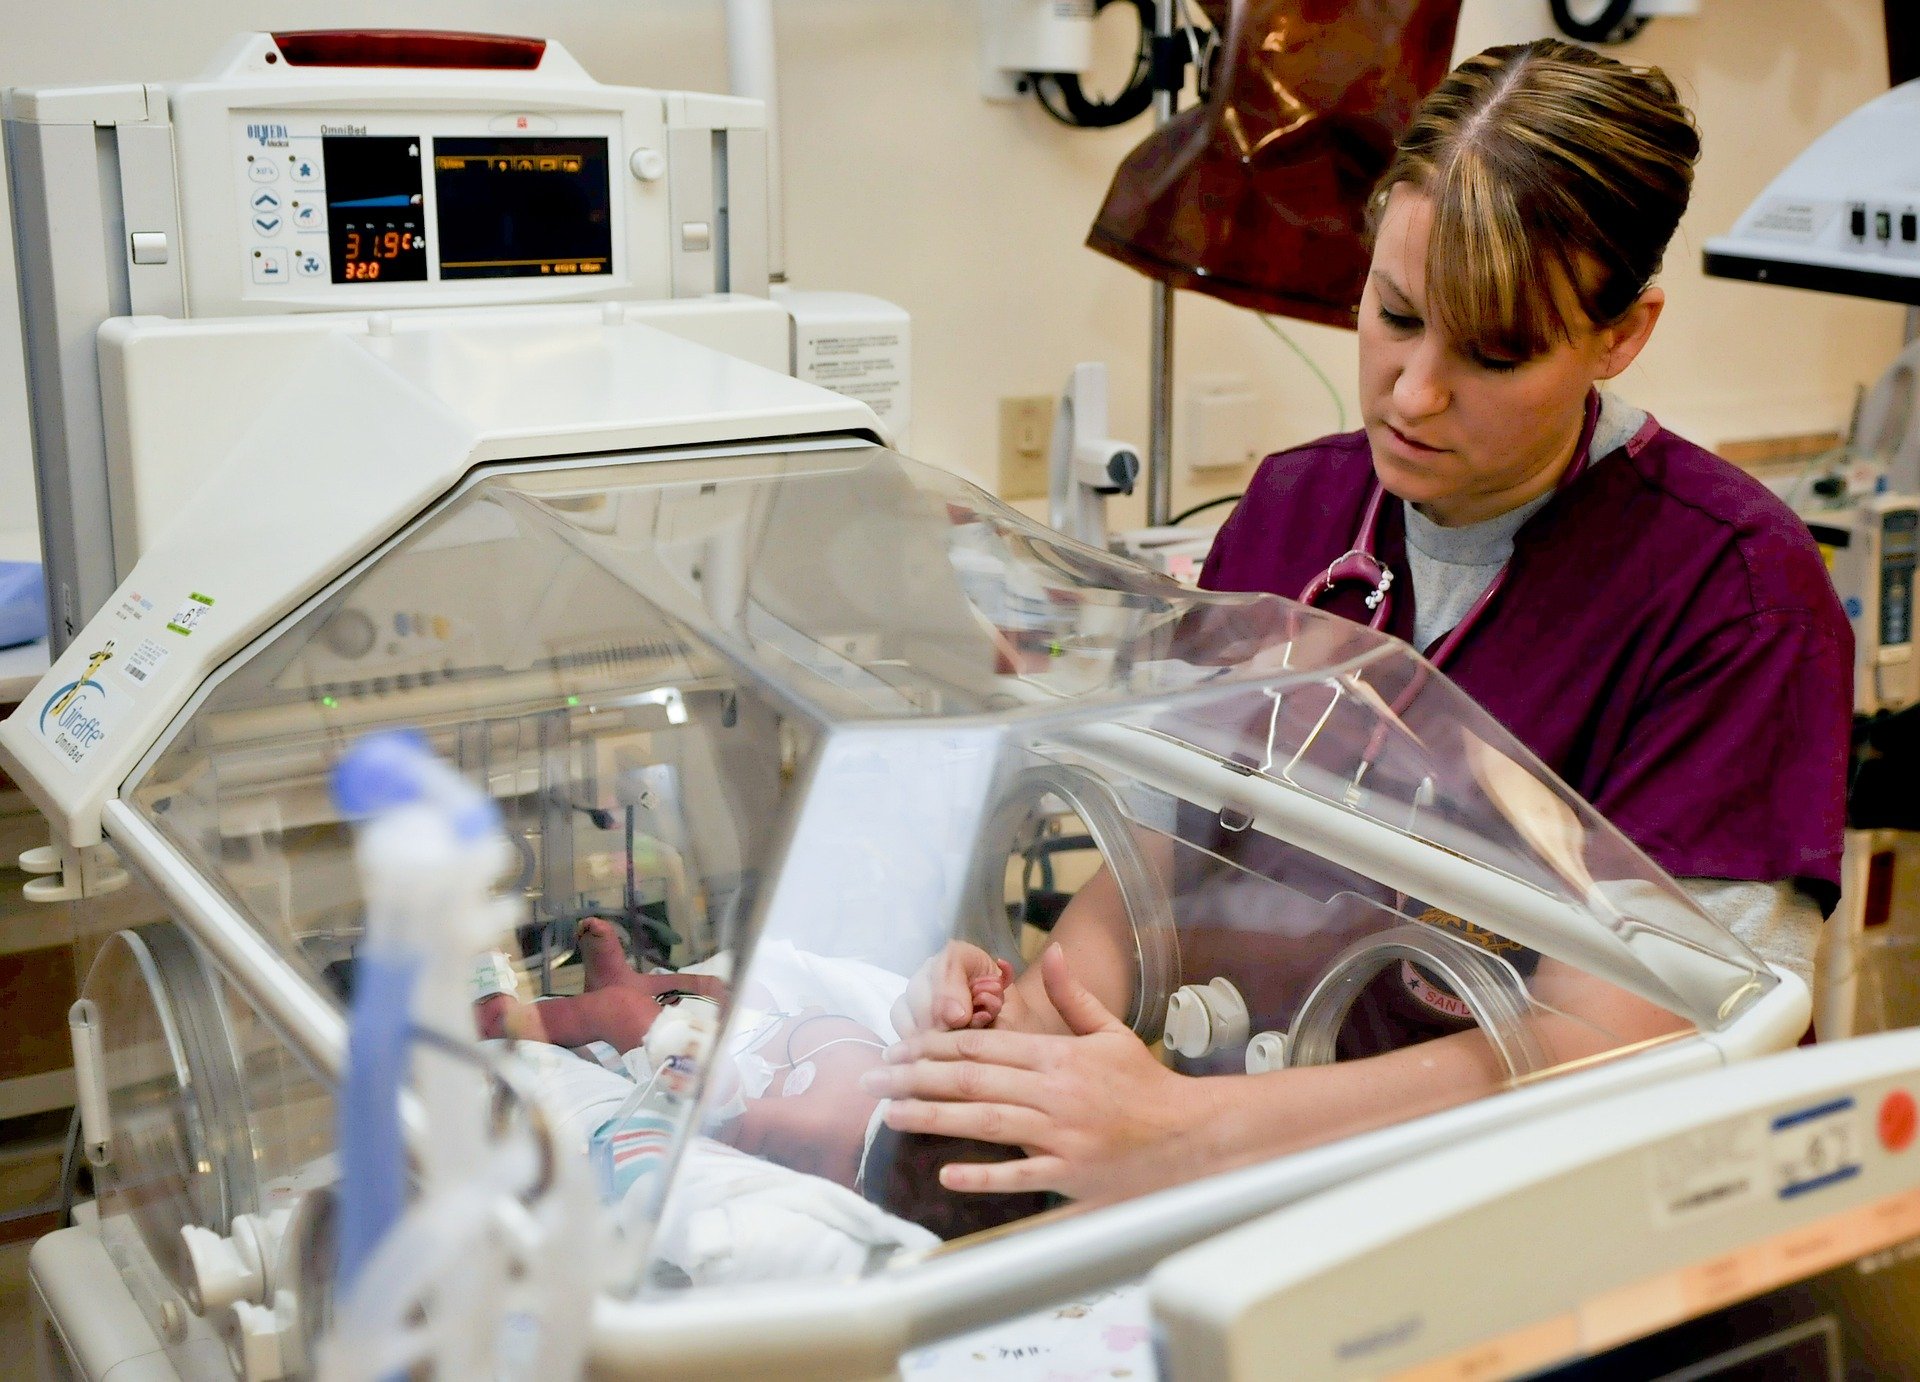 A photograph of a nurse checking up on a newborn who is on the ventilator | Source: Pixabay